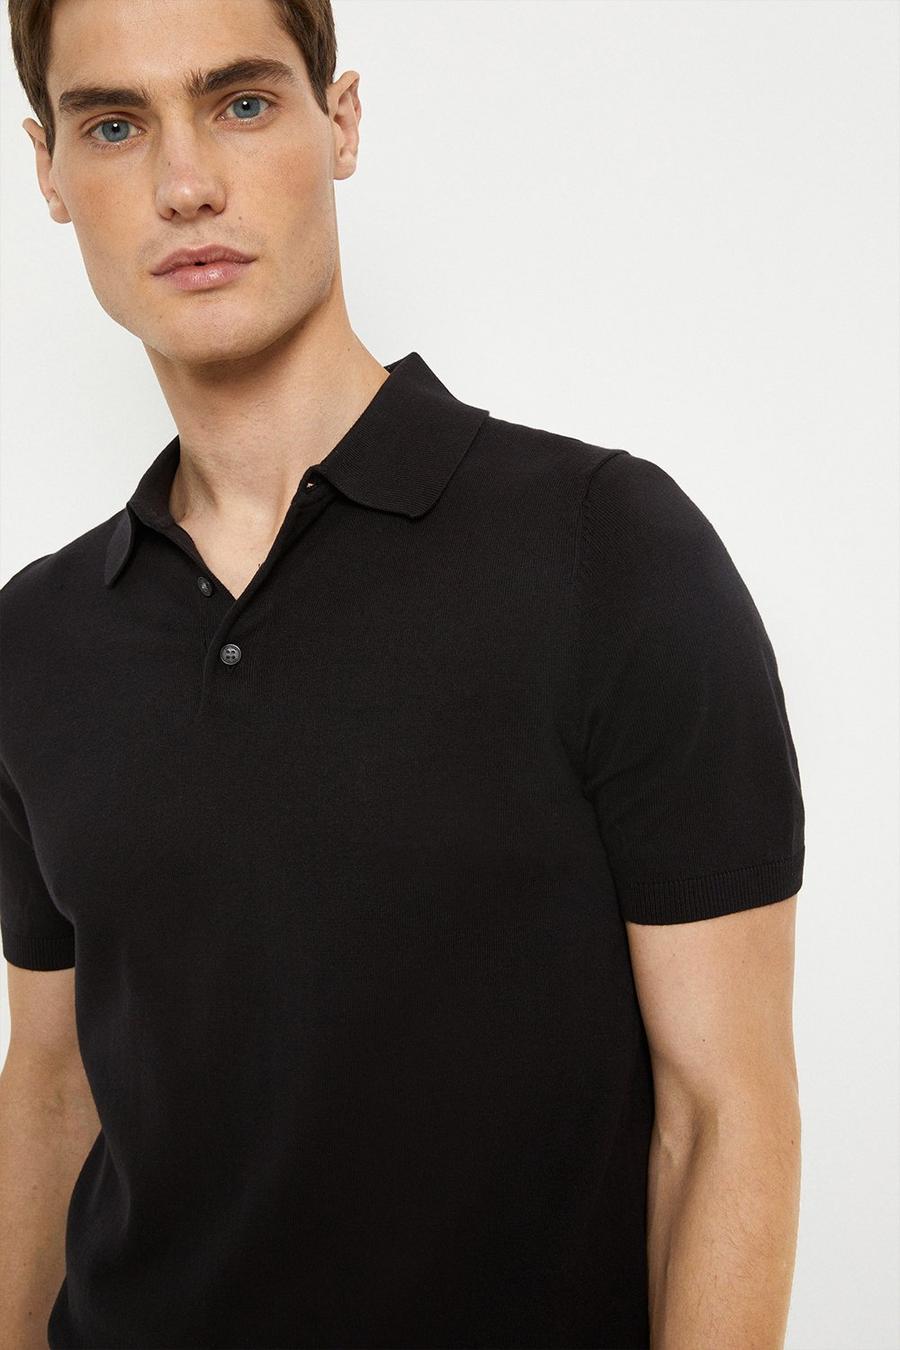 Cotton Rich Black Knitted Polo Shirt